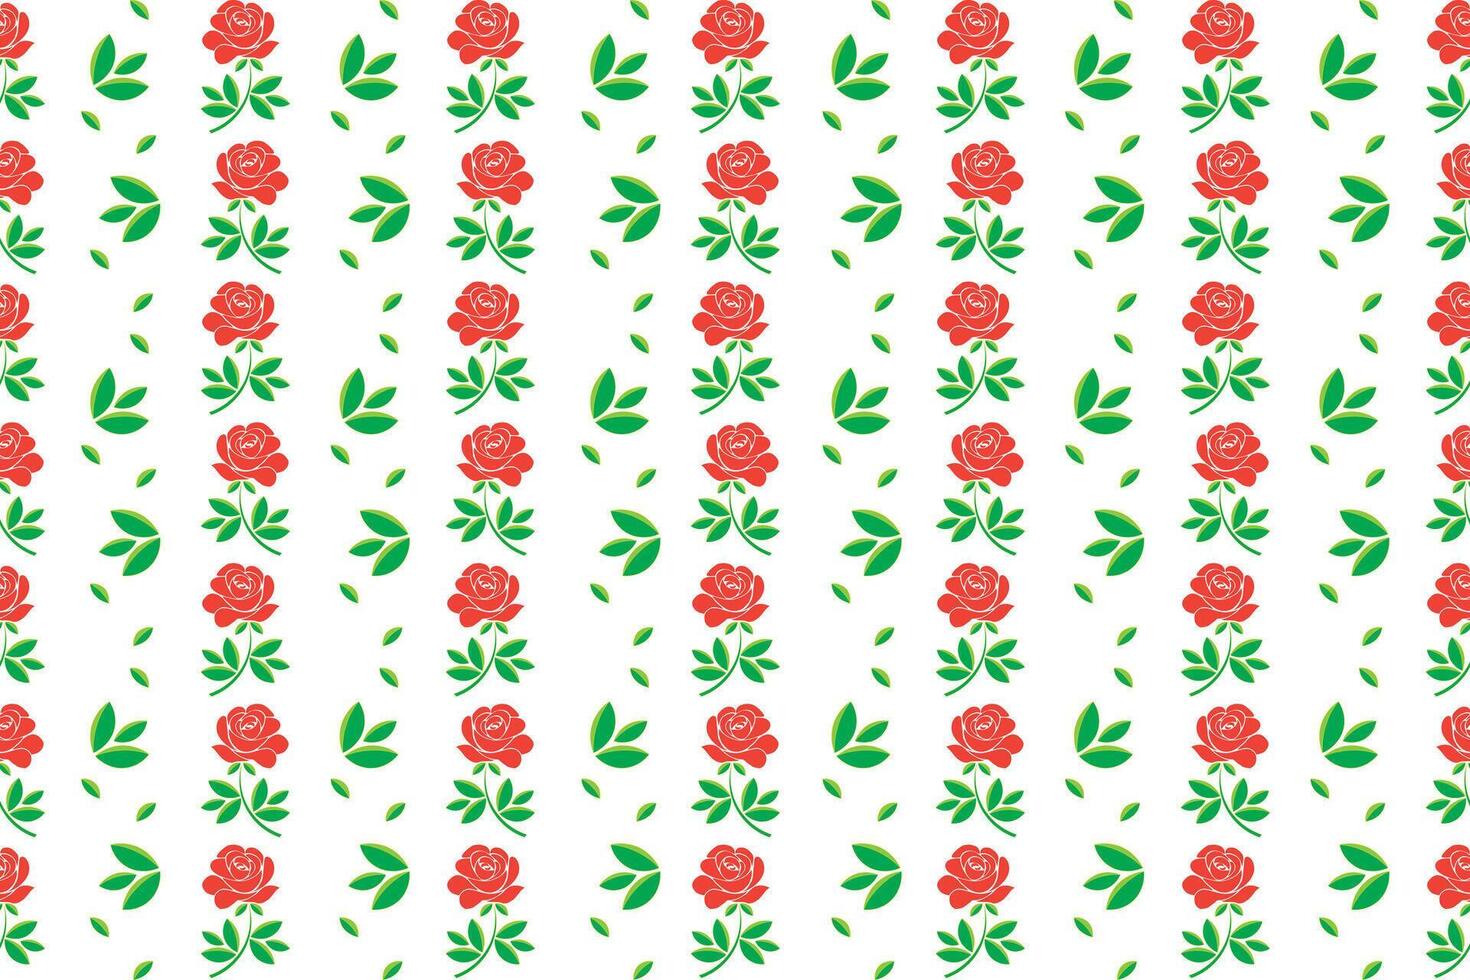 Illustration, pattern of rose flower with leaf on white background. vector